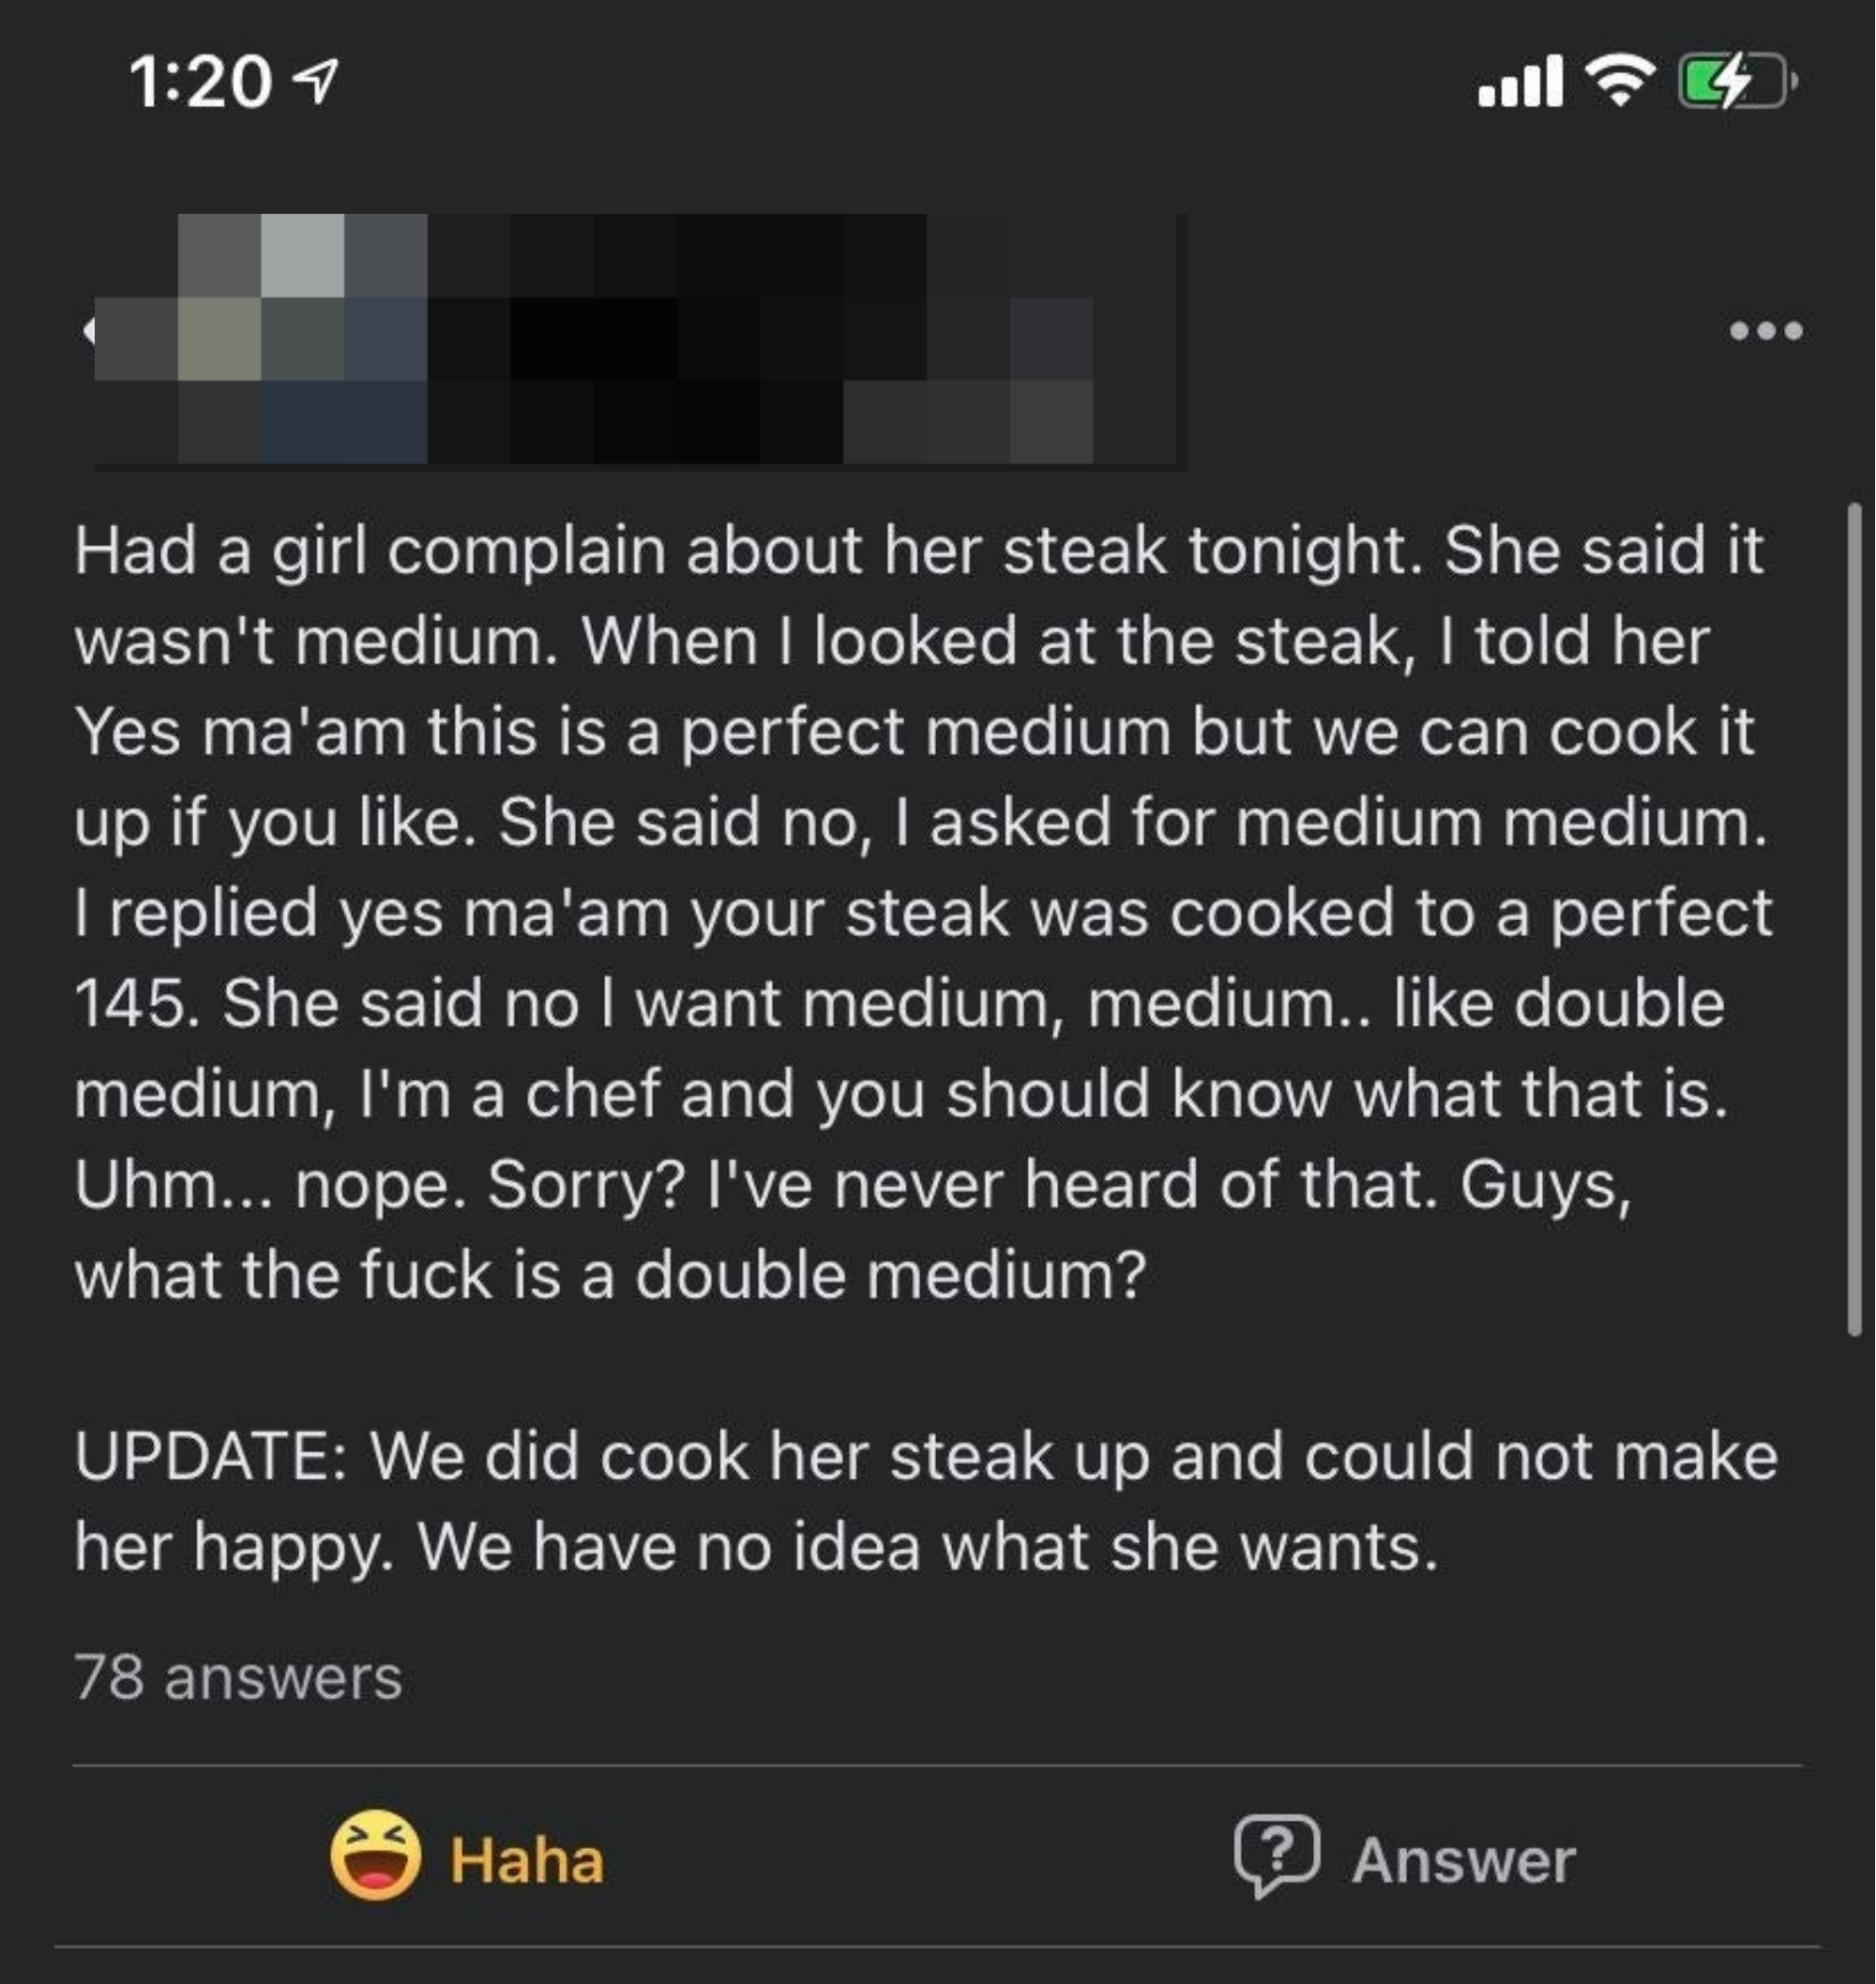 &quot;We did cook her steak up and could not make her happy. We have no idea what she wants.&quot;